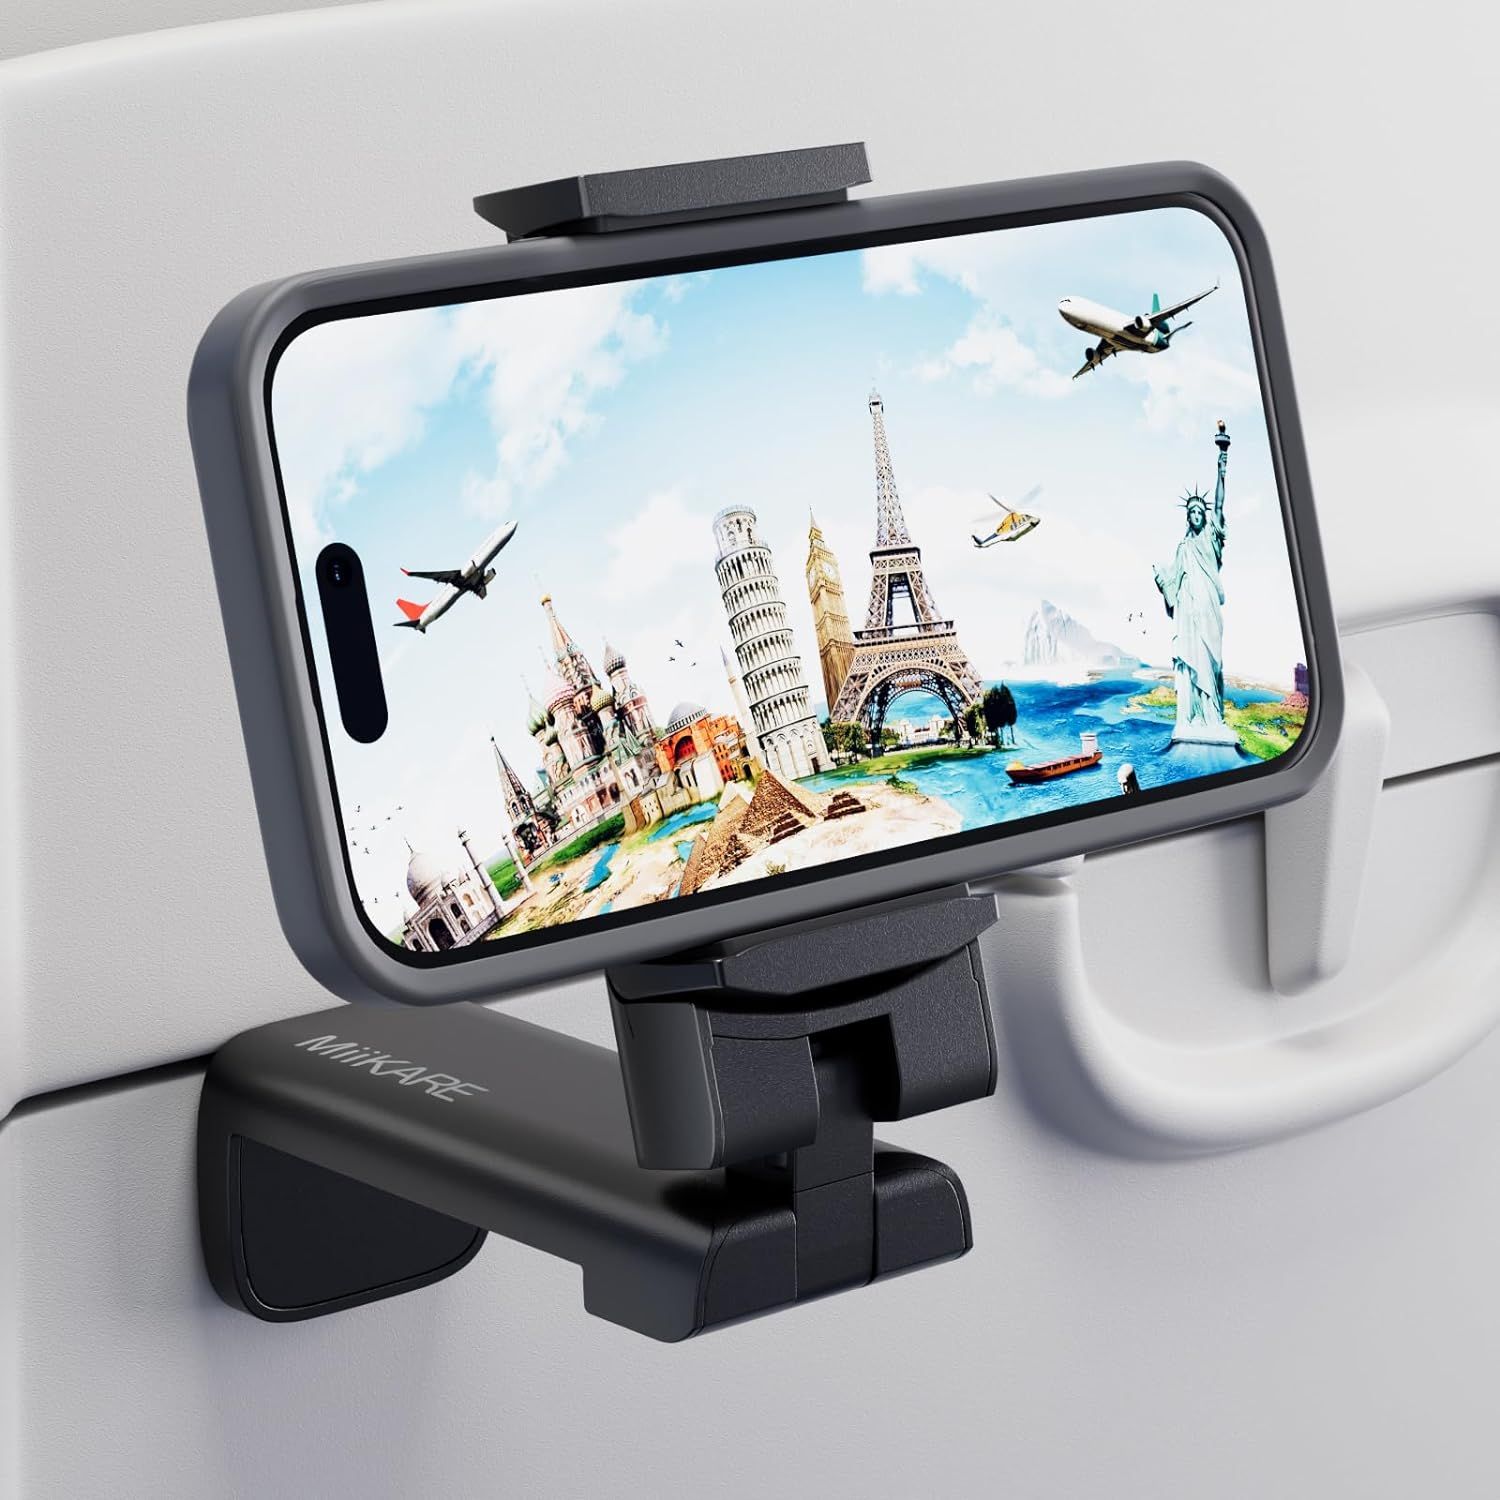 MiiKARE Airplane Travel Essentials Phone Holder, Universal Handsfree Phone Mount for Flying with 360 Degree Rotation, Accessory for Airplane, Travel Must Haves Phone Stand for Desk, Tray Table | Amazon (US)